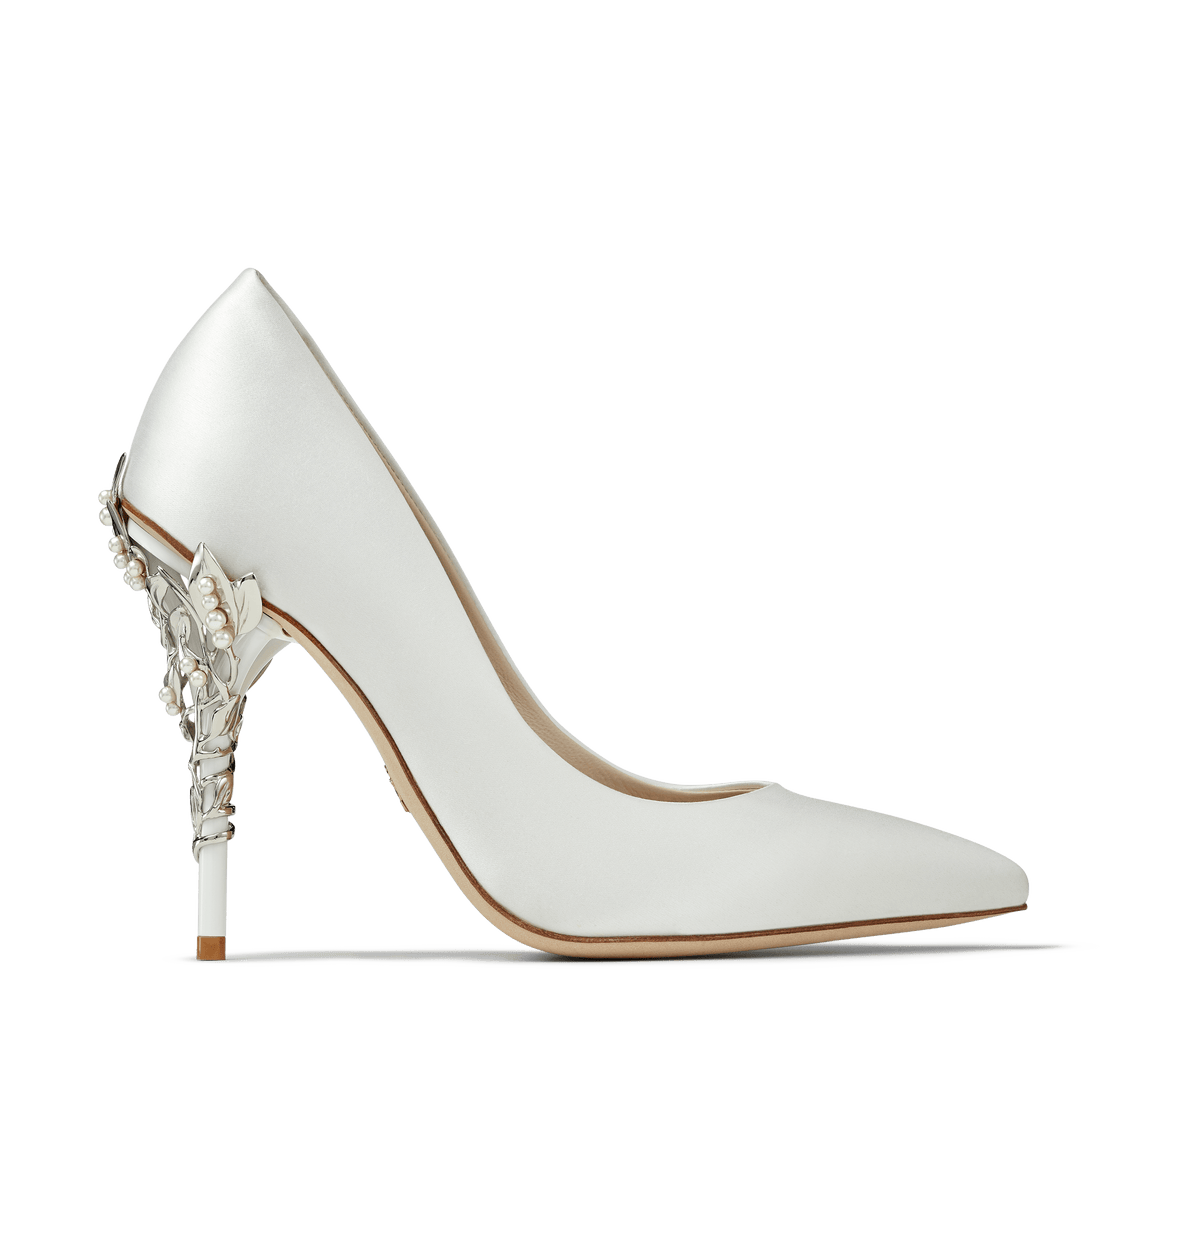 White Satin Eden Heels with Pearl and Silver Leaves